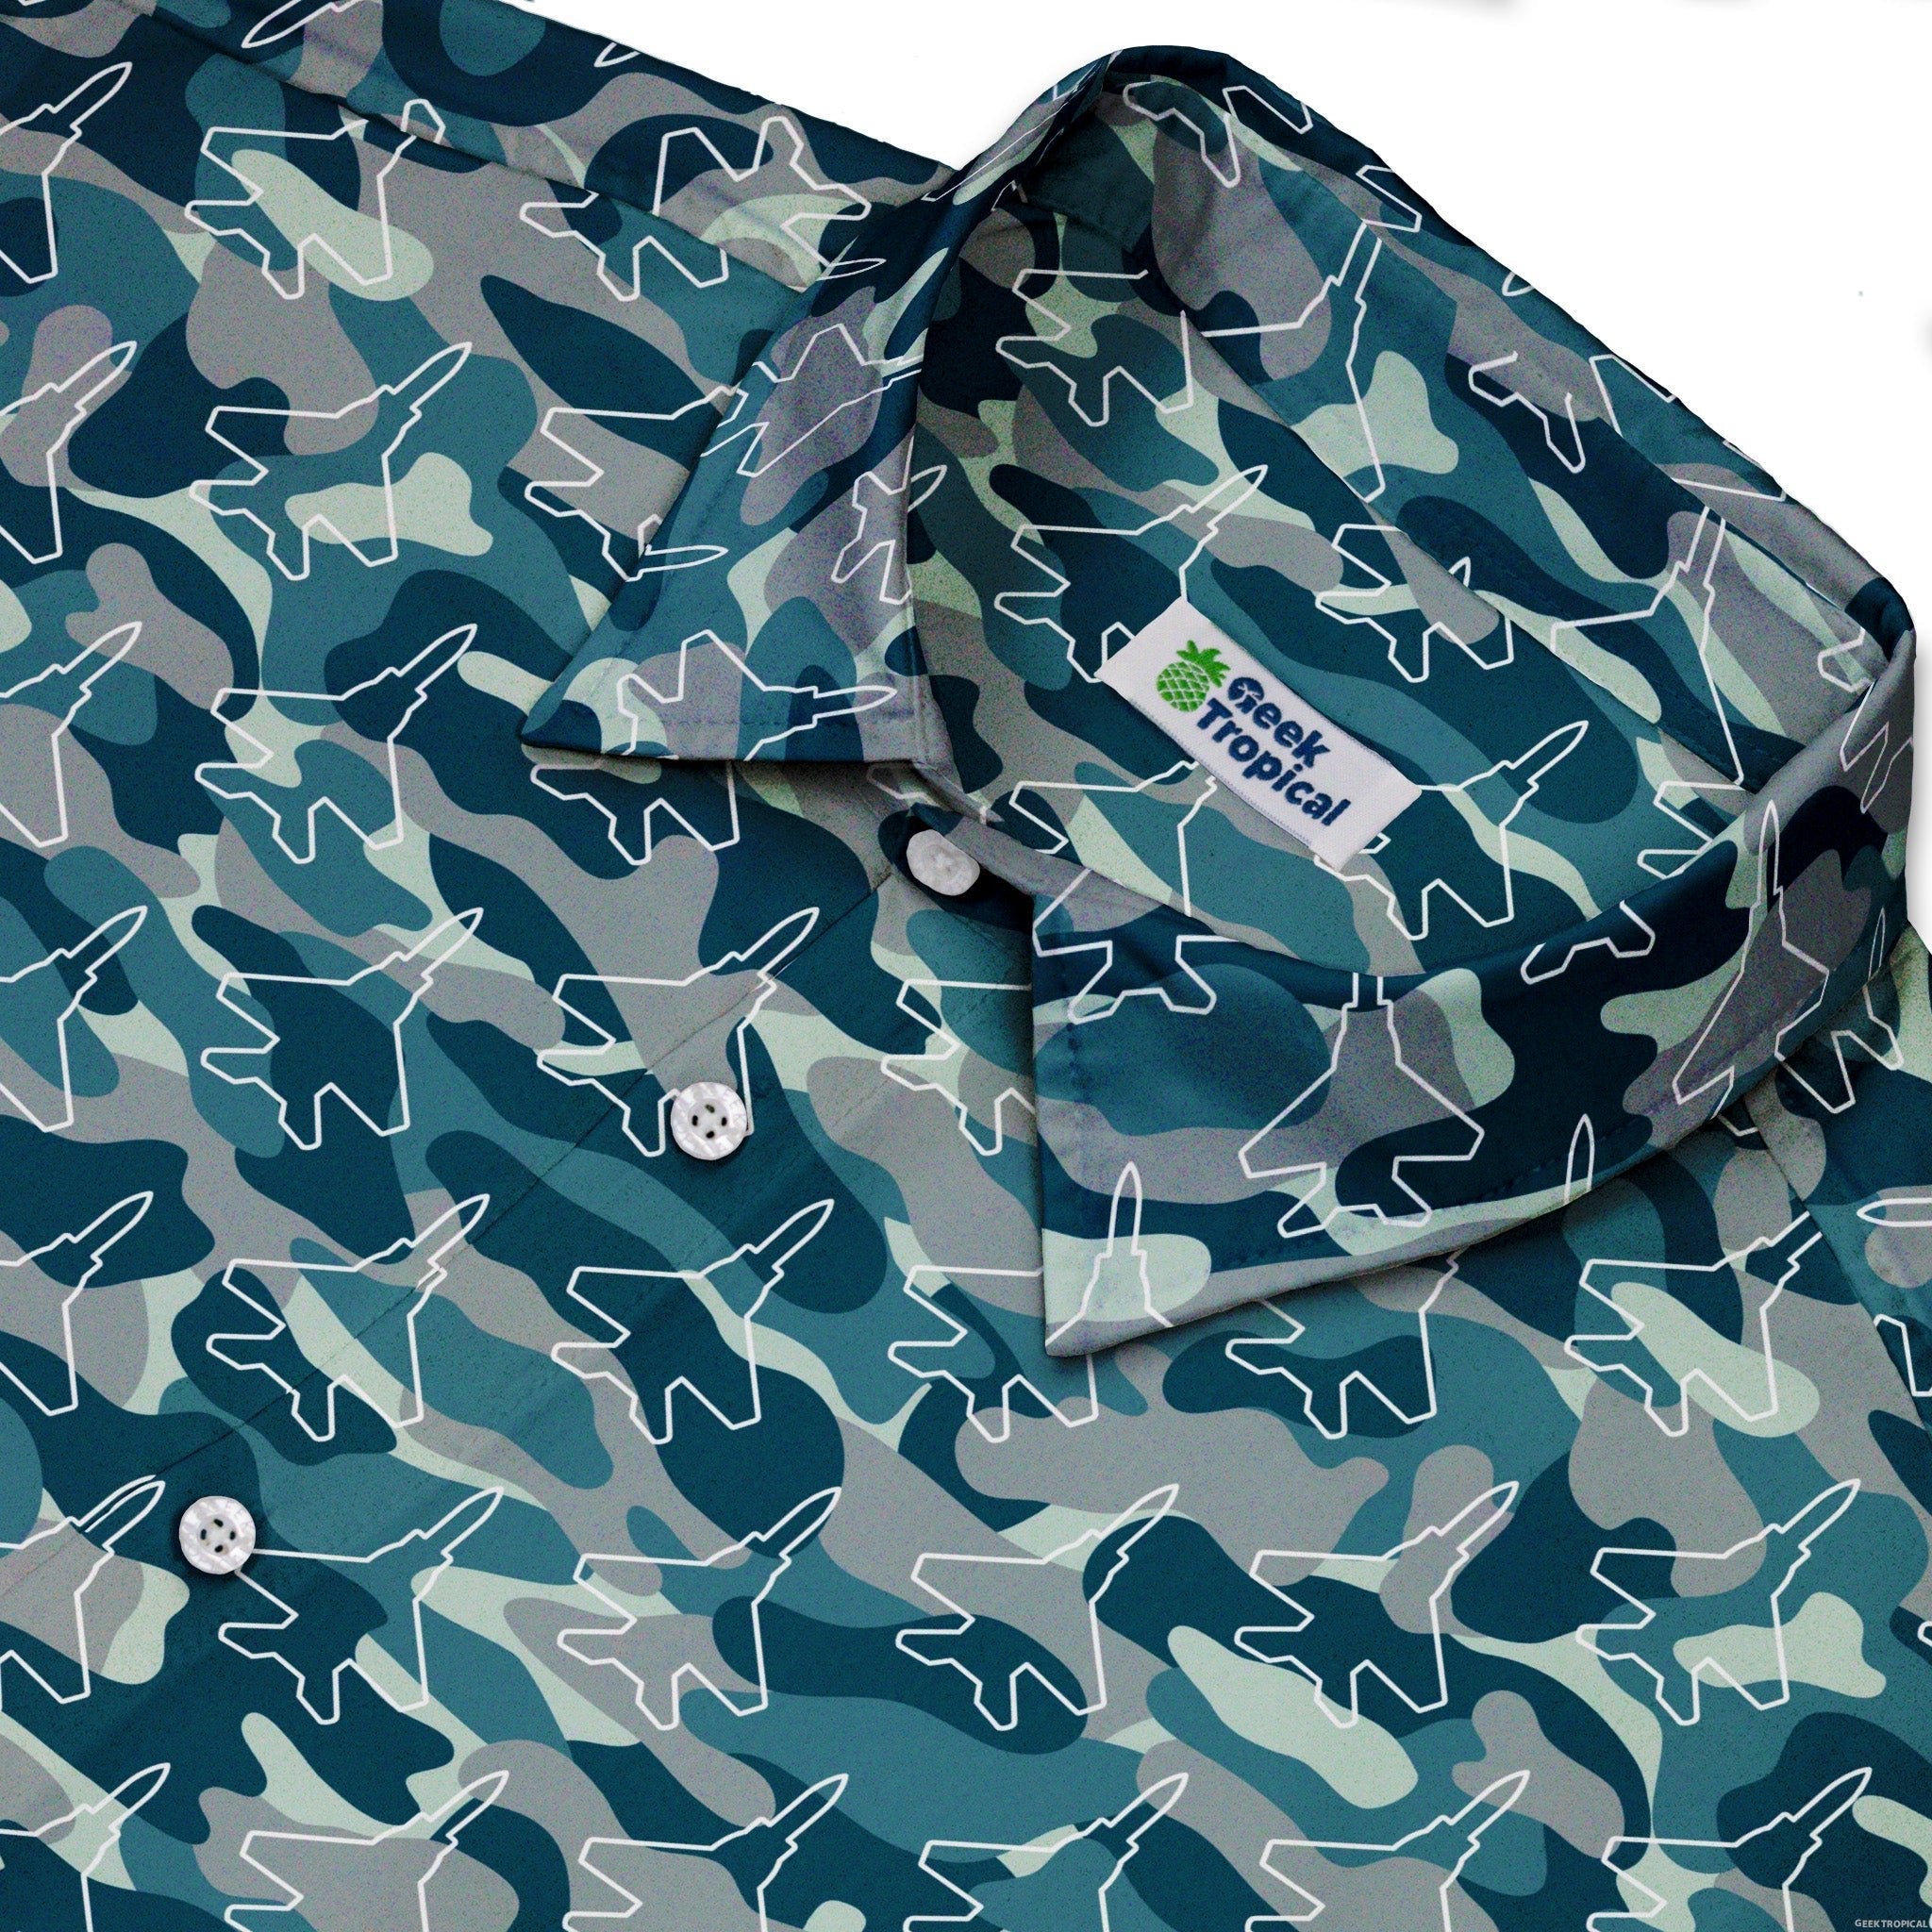 Military Fighter Jet Navy Camo Blue Button Up Shirt - adult sizing - aviation print -